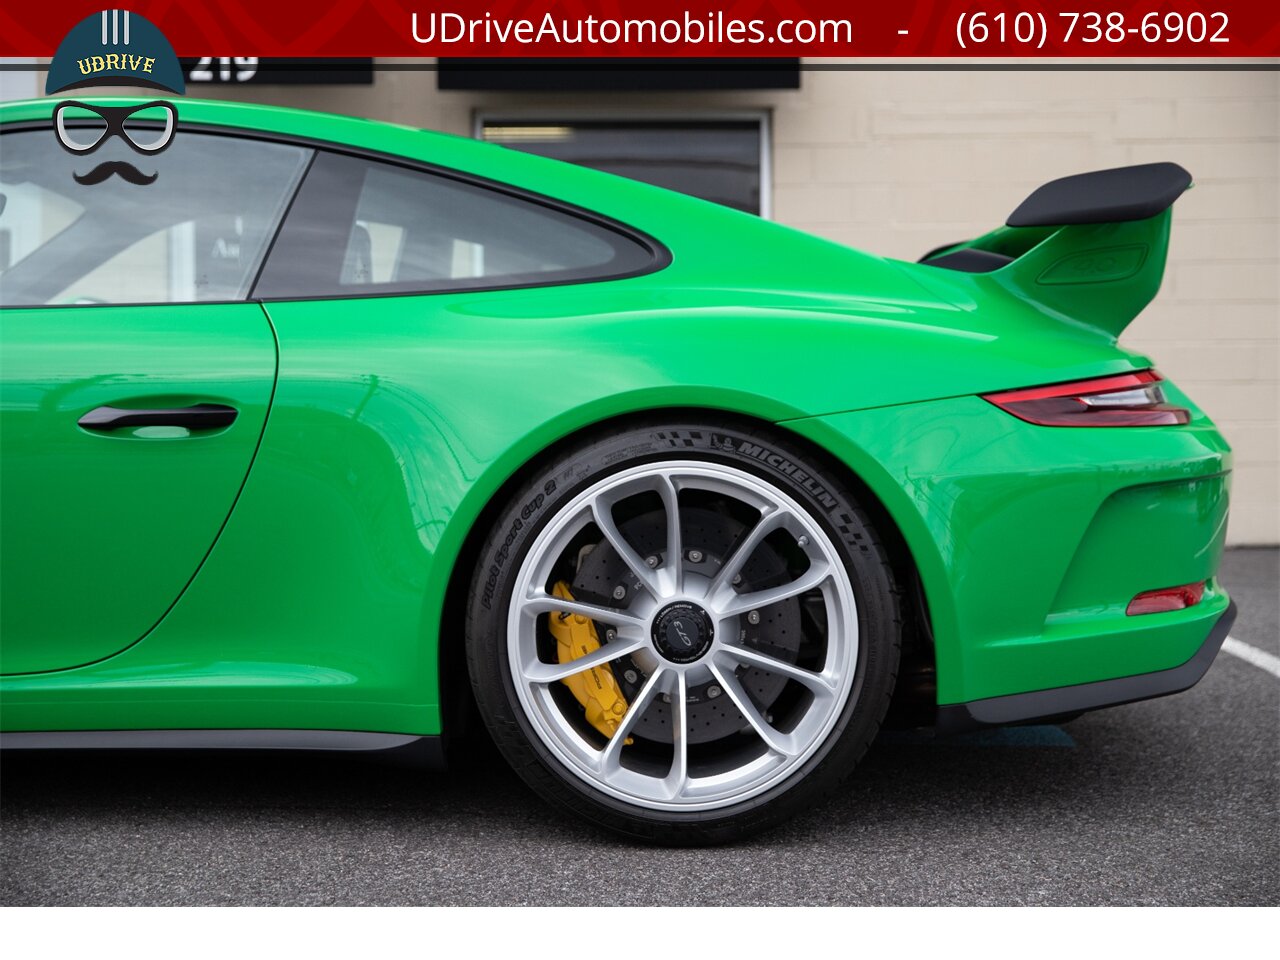 2018 Porsche 911 GT3 6 Speed Paint To Sample Viper Green 48 Miles  Front Axle Lift PCCB Carbon Bucket Seats - Photo 23 - West Chester, PA 19382